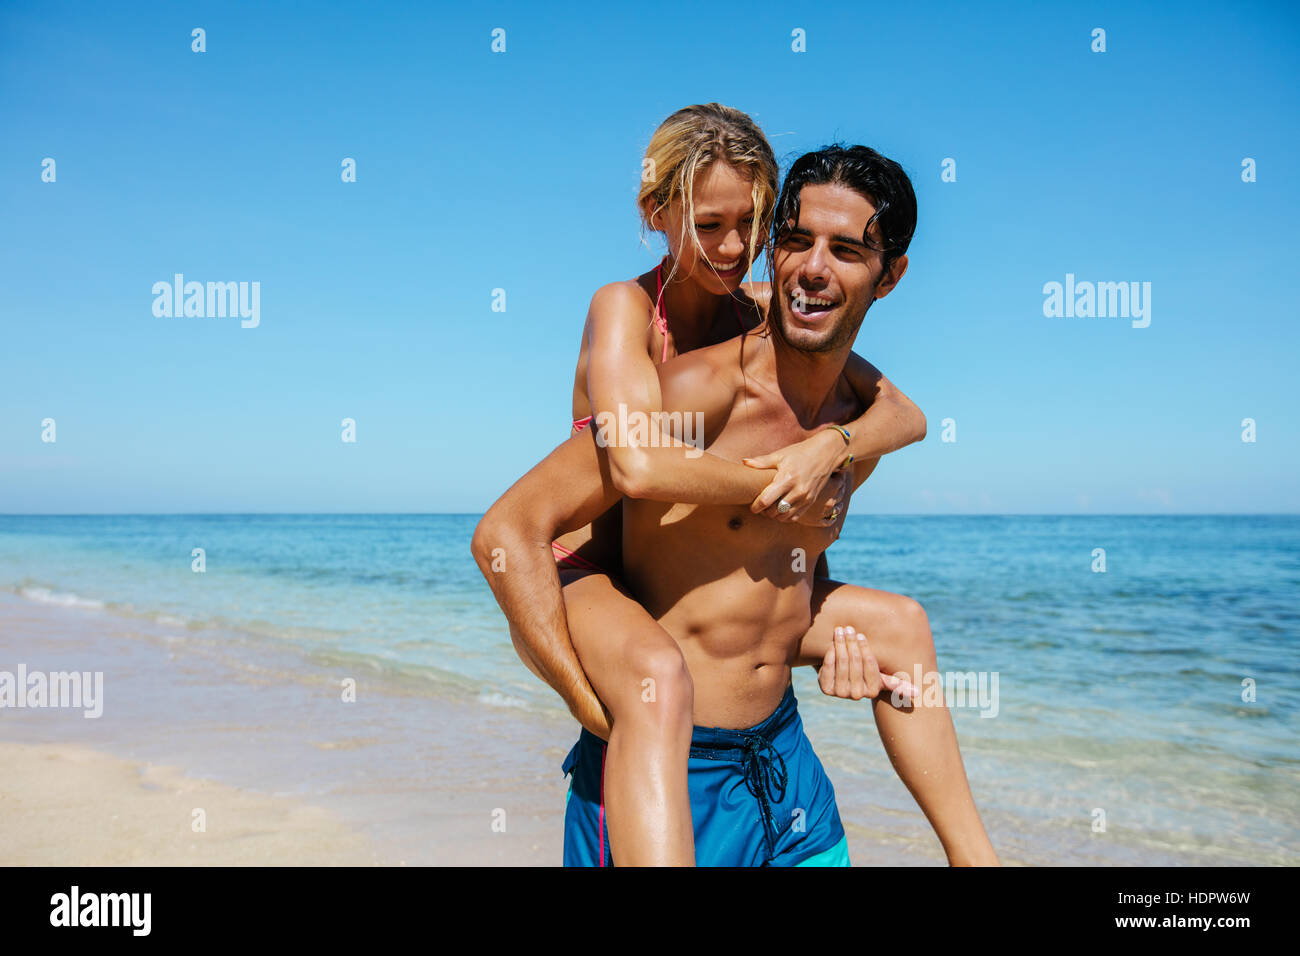 Portrait of man carrying girlfriend on his back. Couple enjoying piggyback ride on the beach vacation. Stock Photo